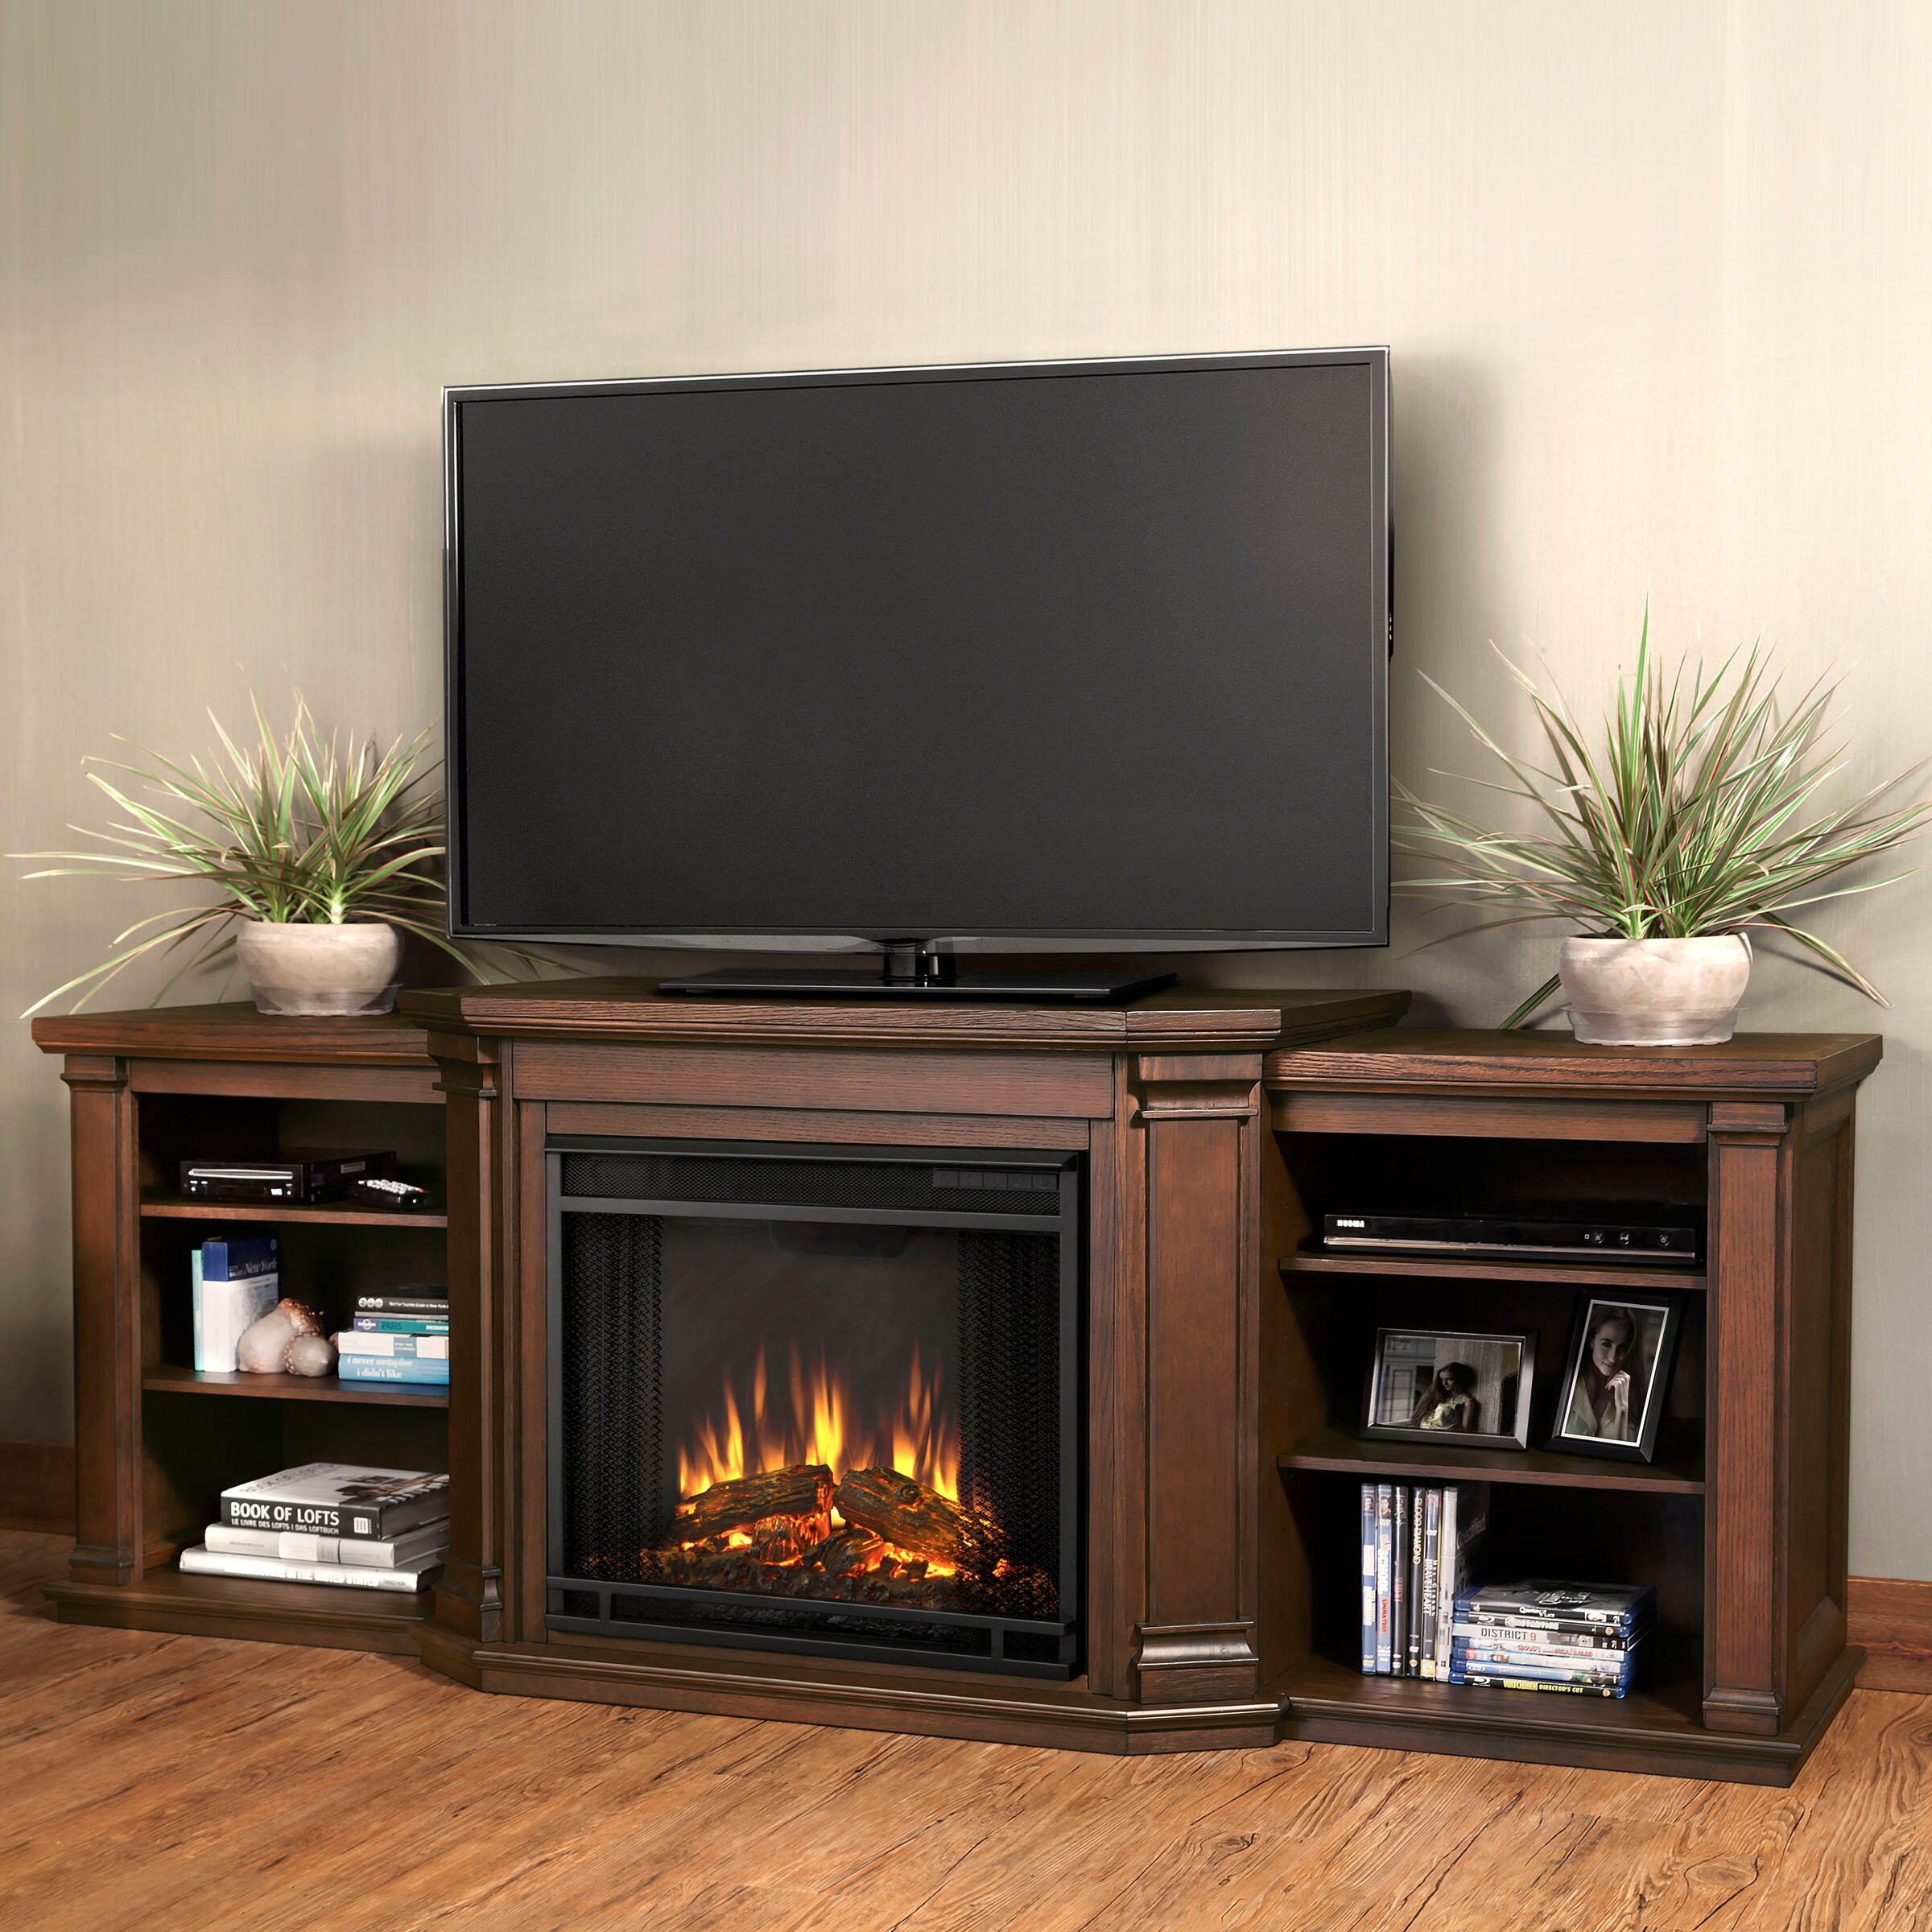 Tv Electric Fireplace Luxury Real Flame Valmont Tv Stand with Electric Fireplace